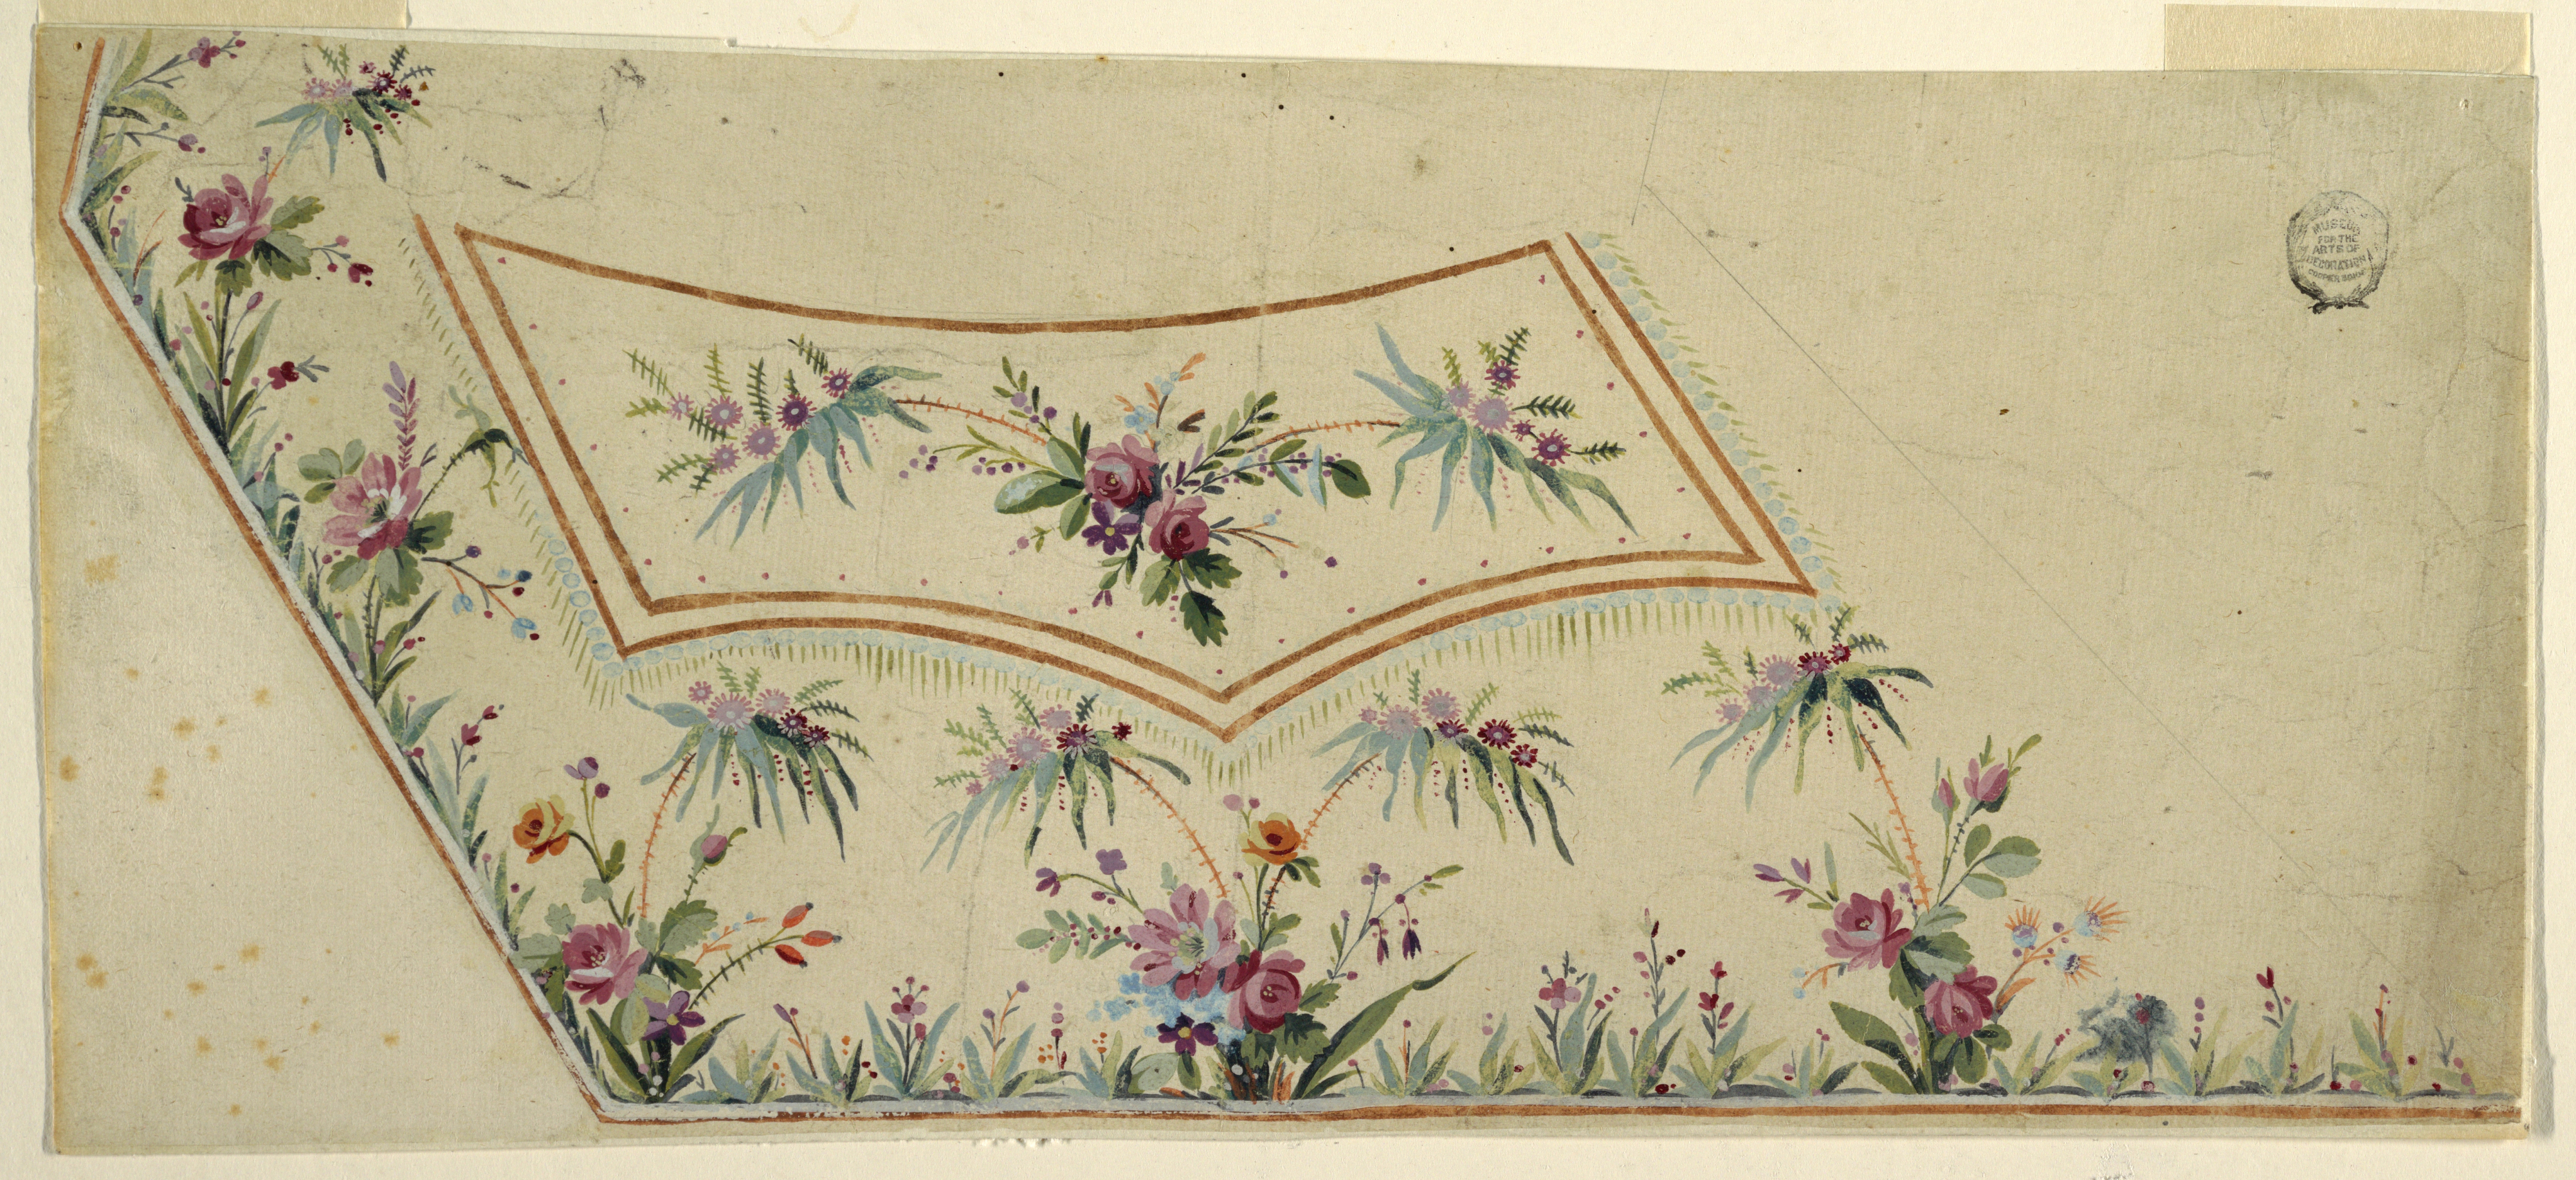 History of the Embroidery frames. Bottom corner